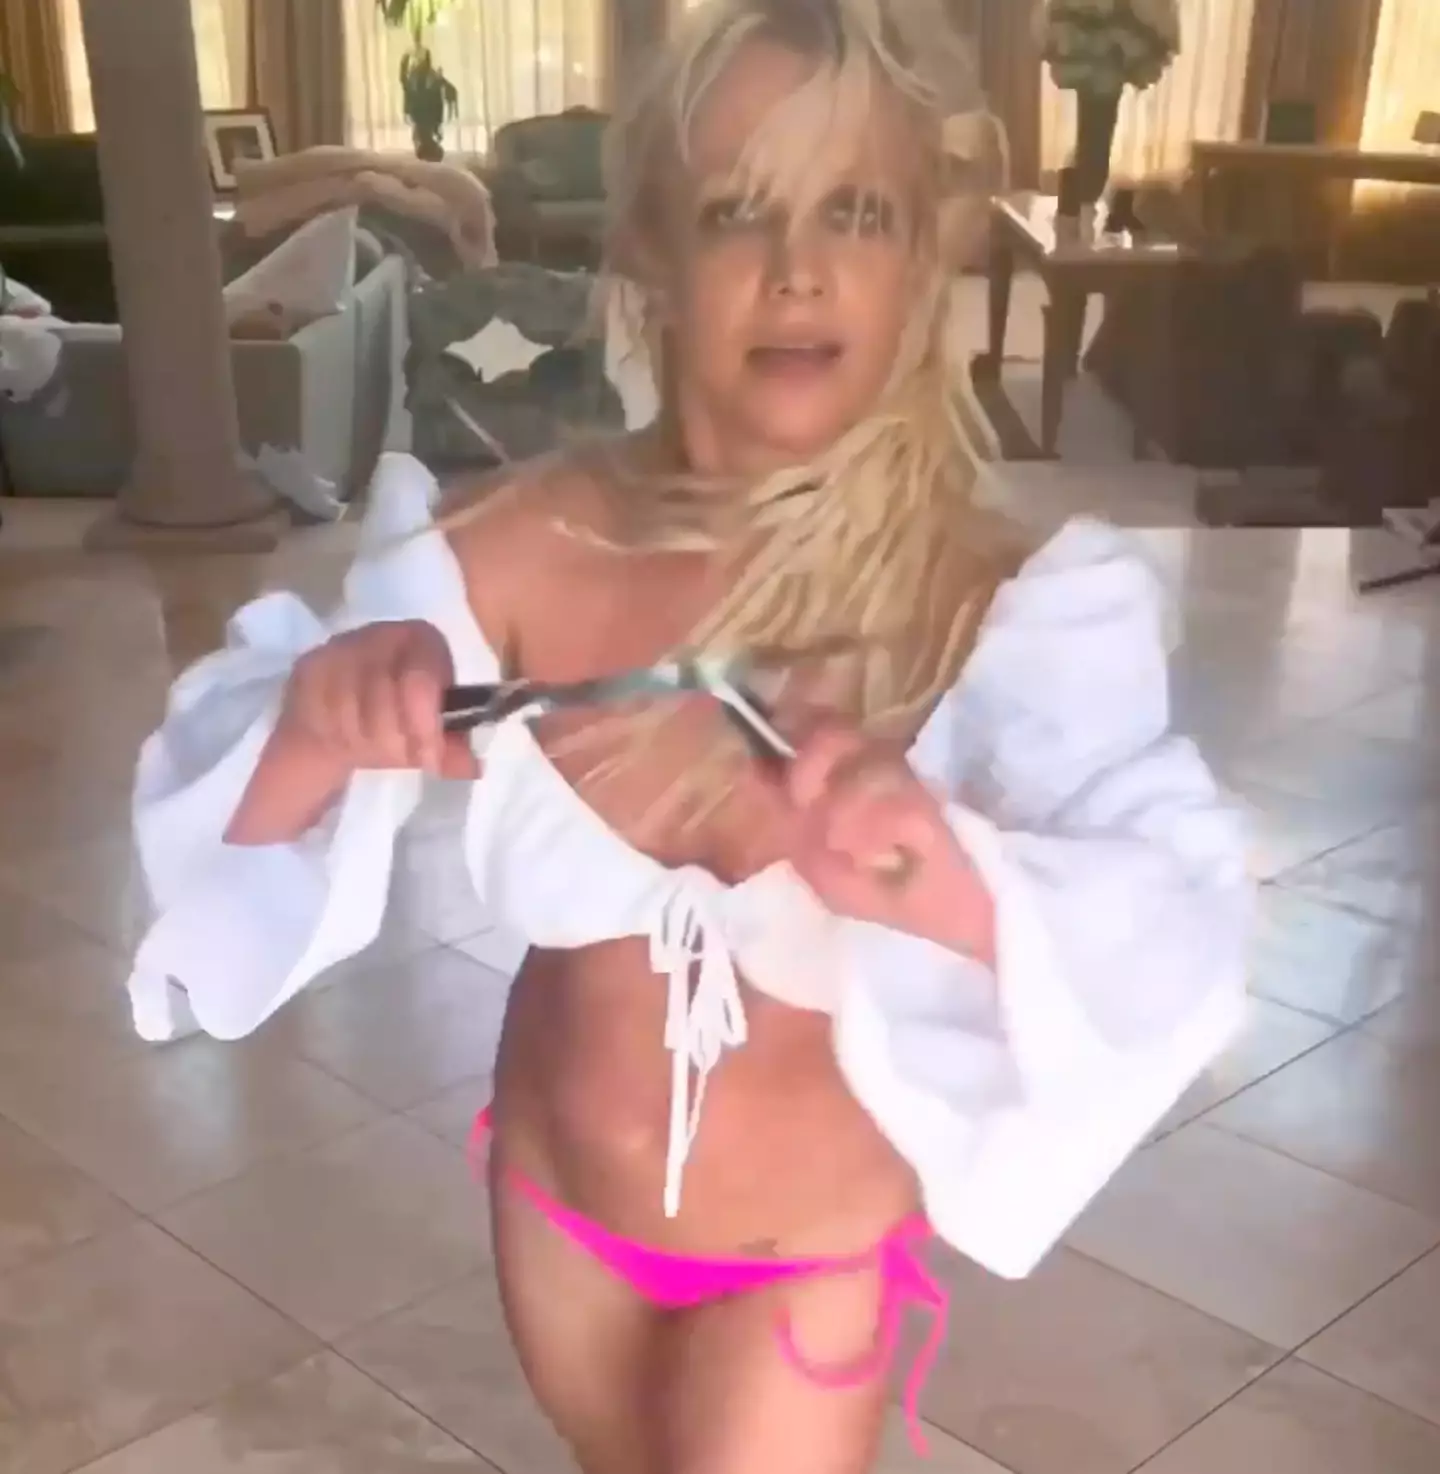 Britney told fans they didn't need to 'call the police'.